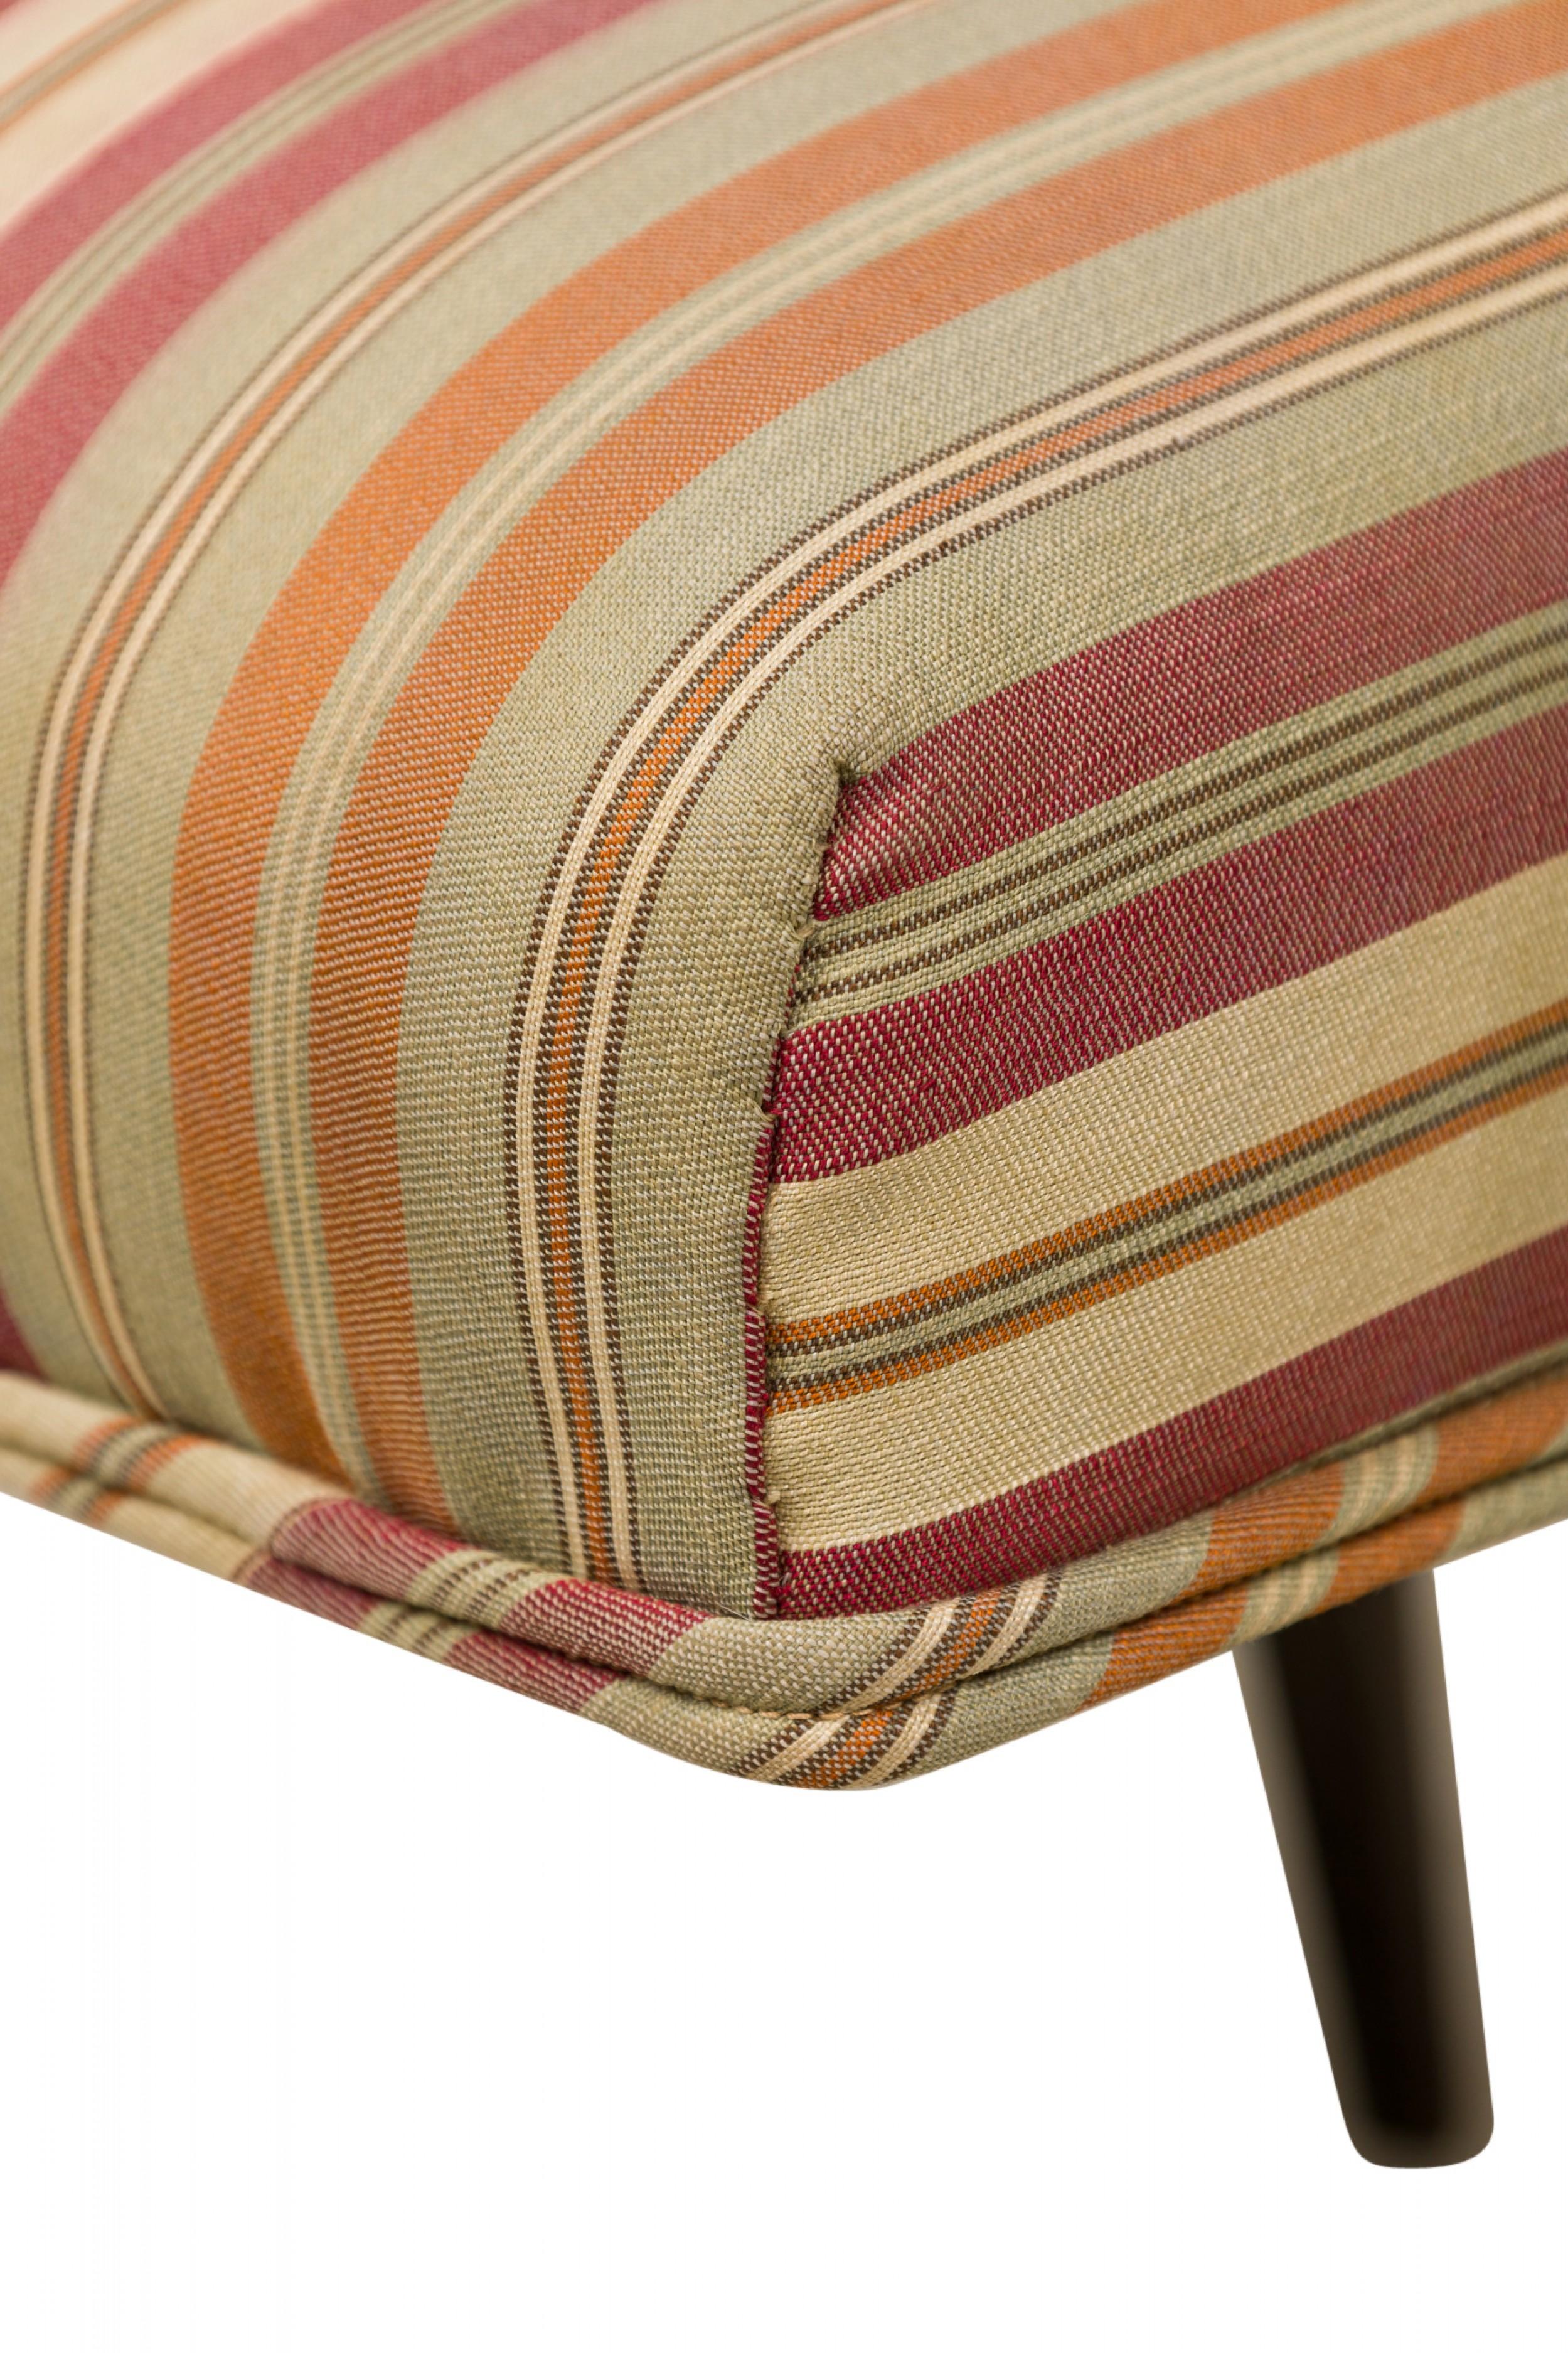 Harvey Probber 'Gondola' Wood and Striped Upholstery Side Chair For Sale 3